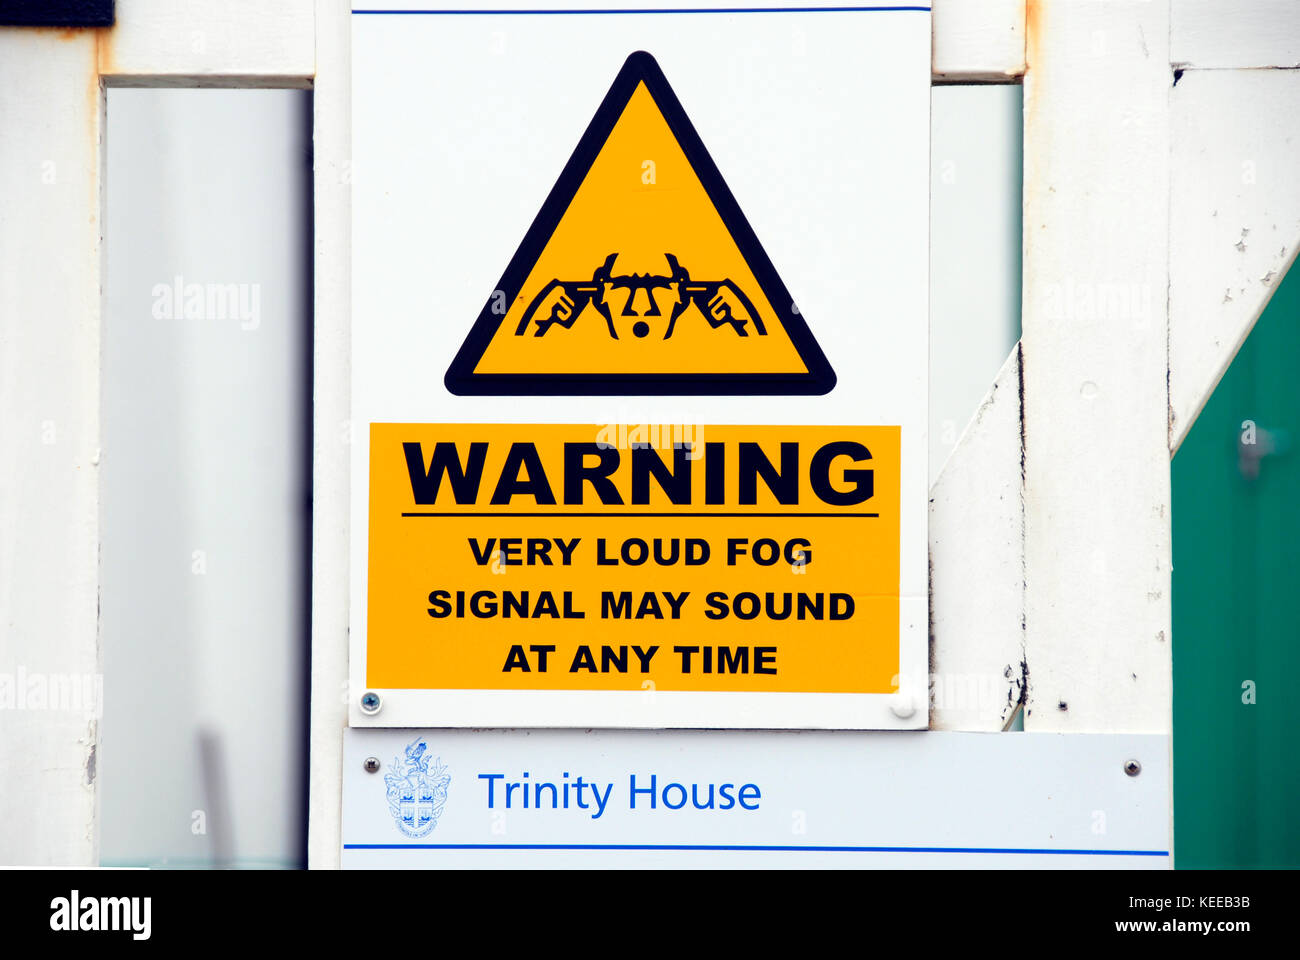 Warning sign for very loud noise Stock Photo